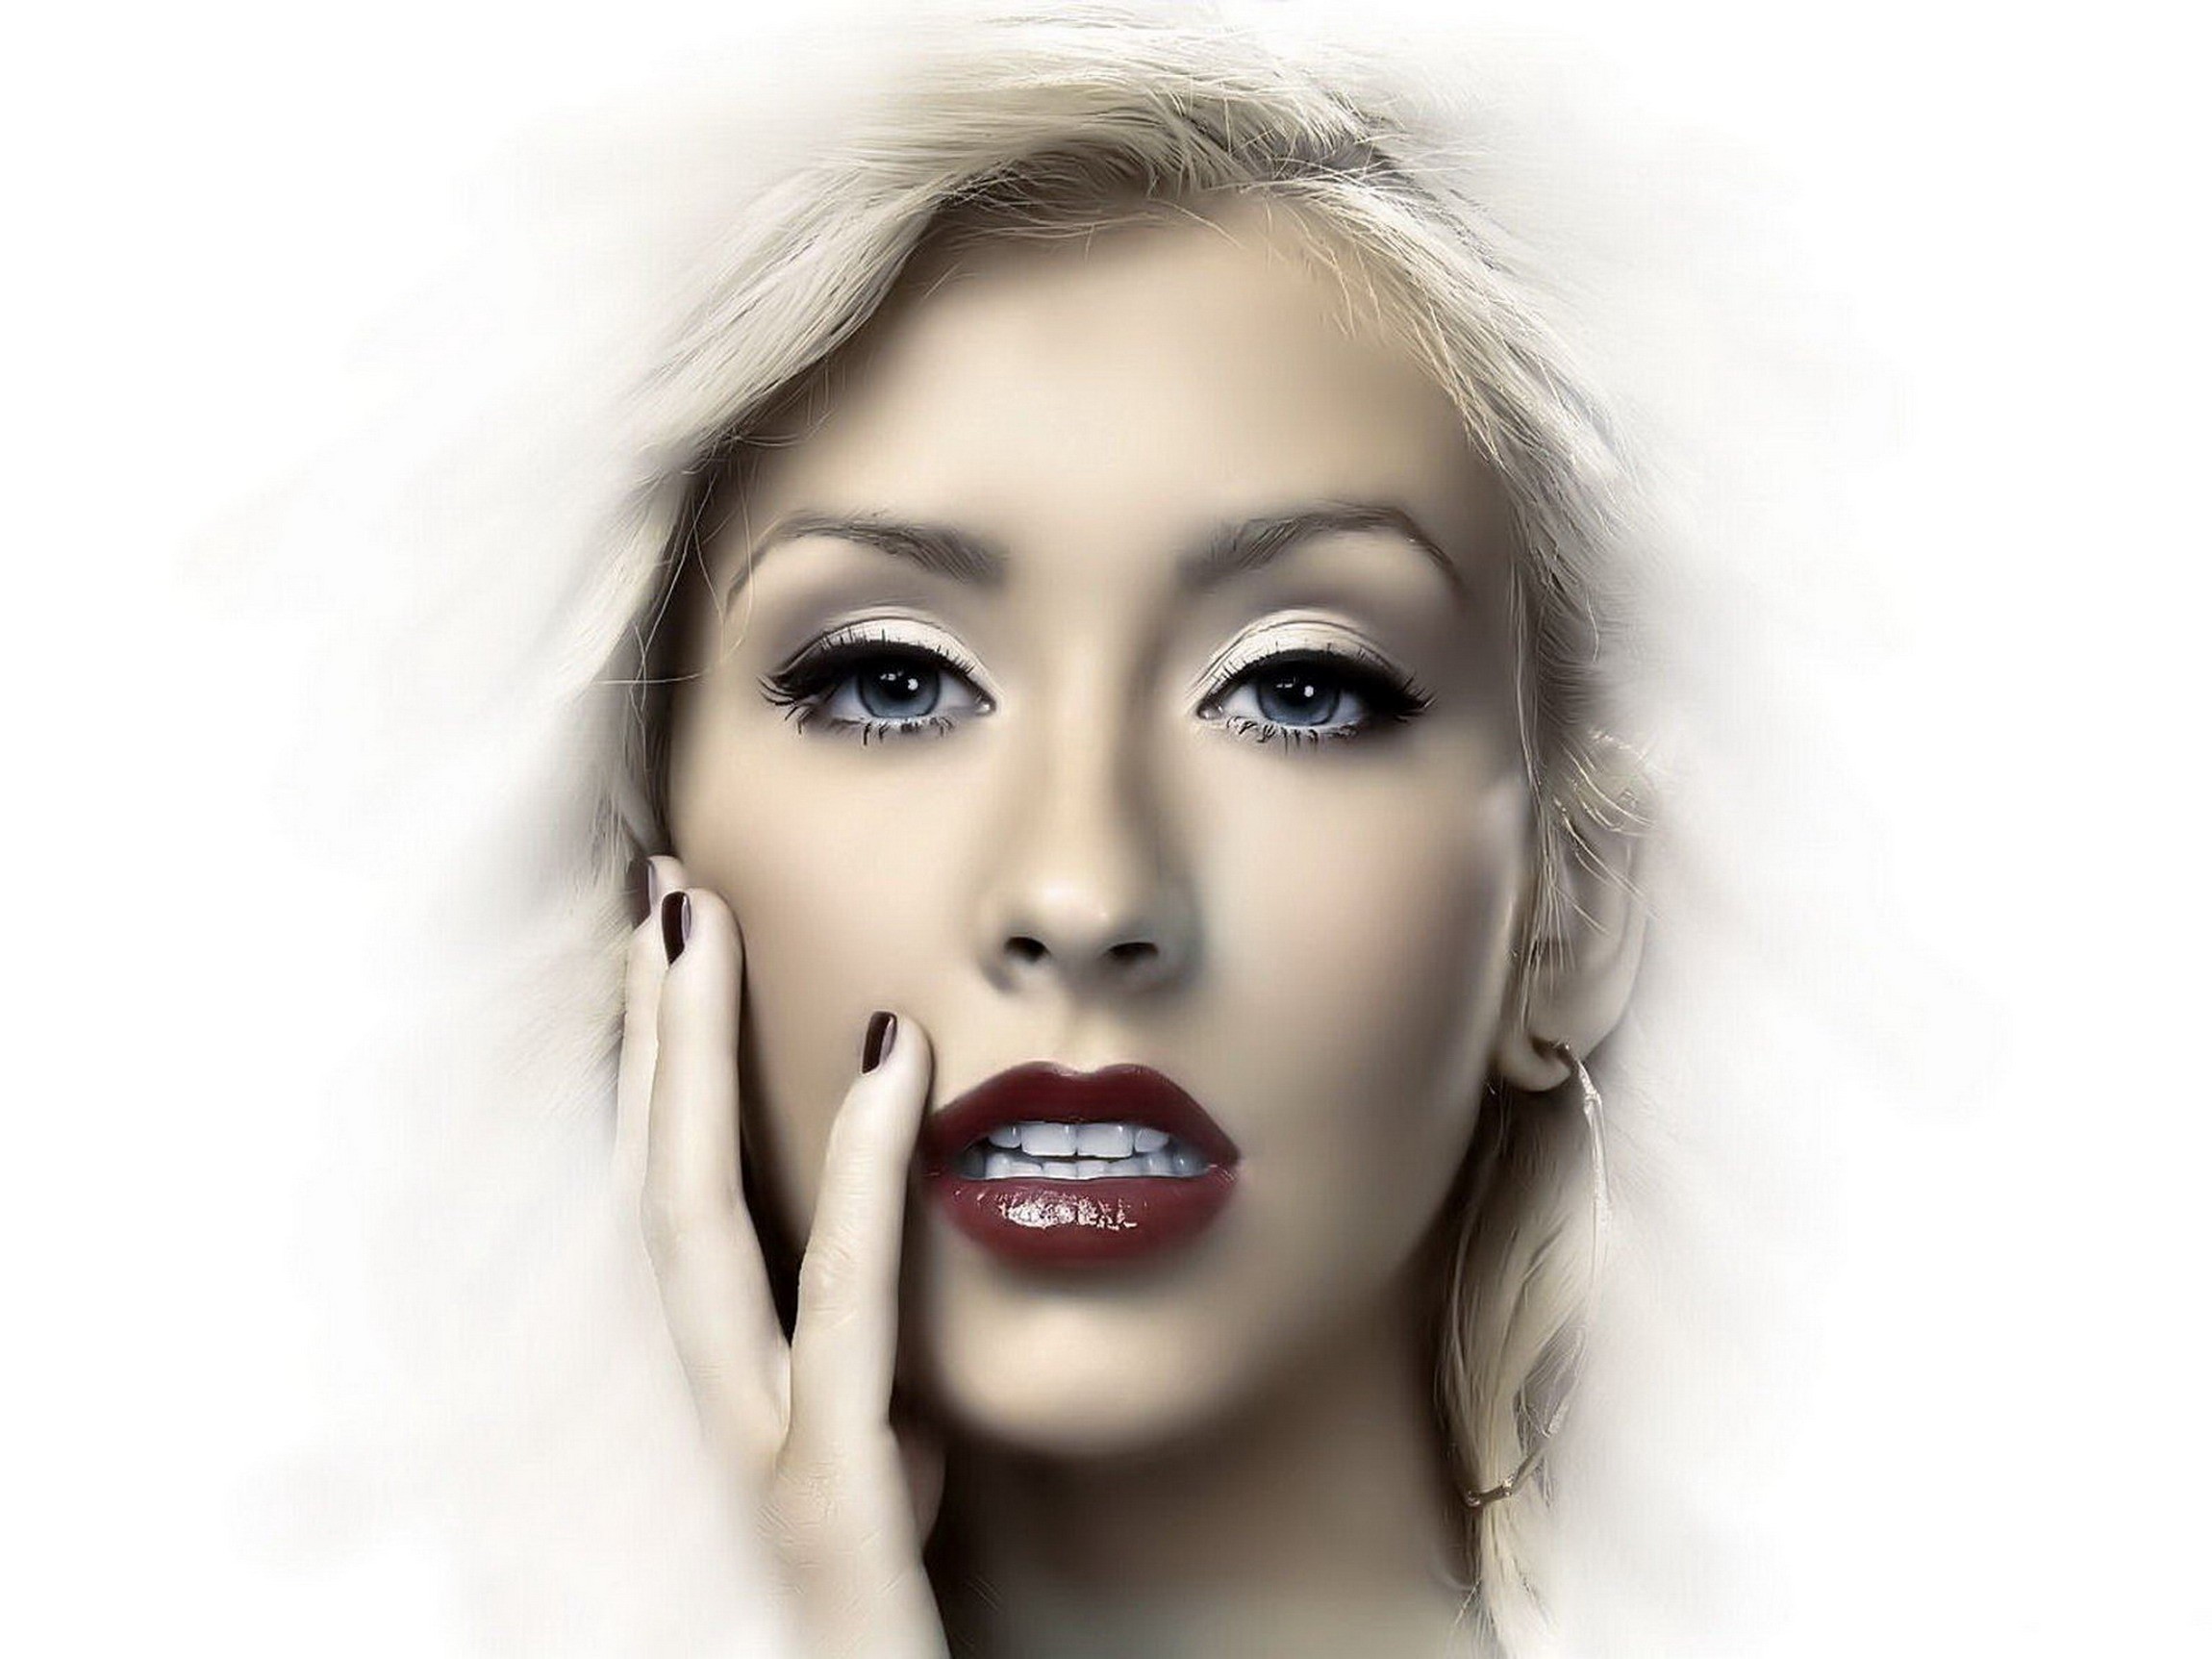 People 2300x1725 Christina Aguilera singer vignette face celebrity red lipstick women makeup simple background white background looking at viewer closeup